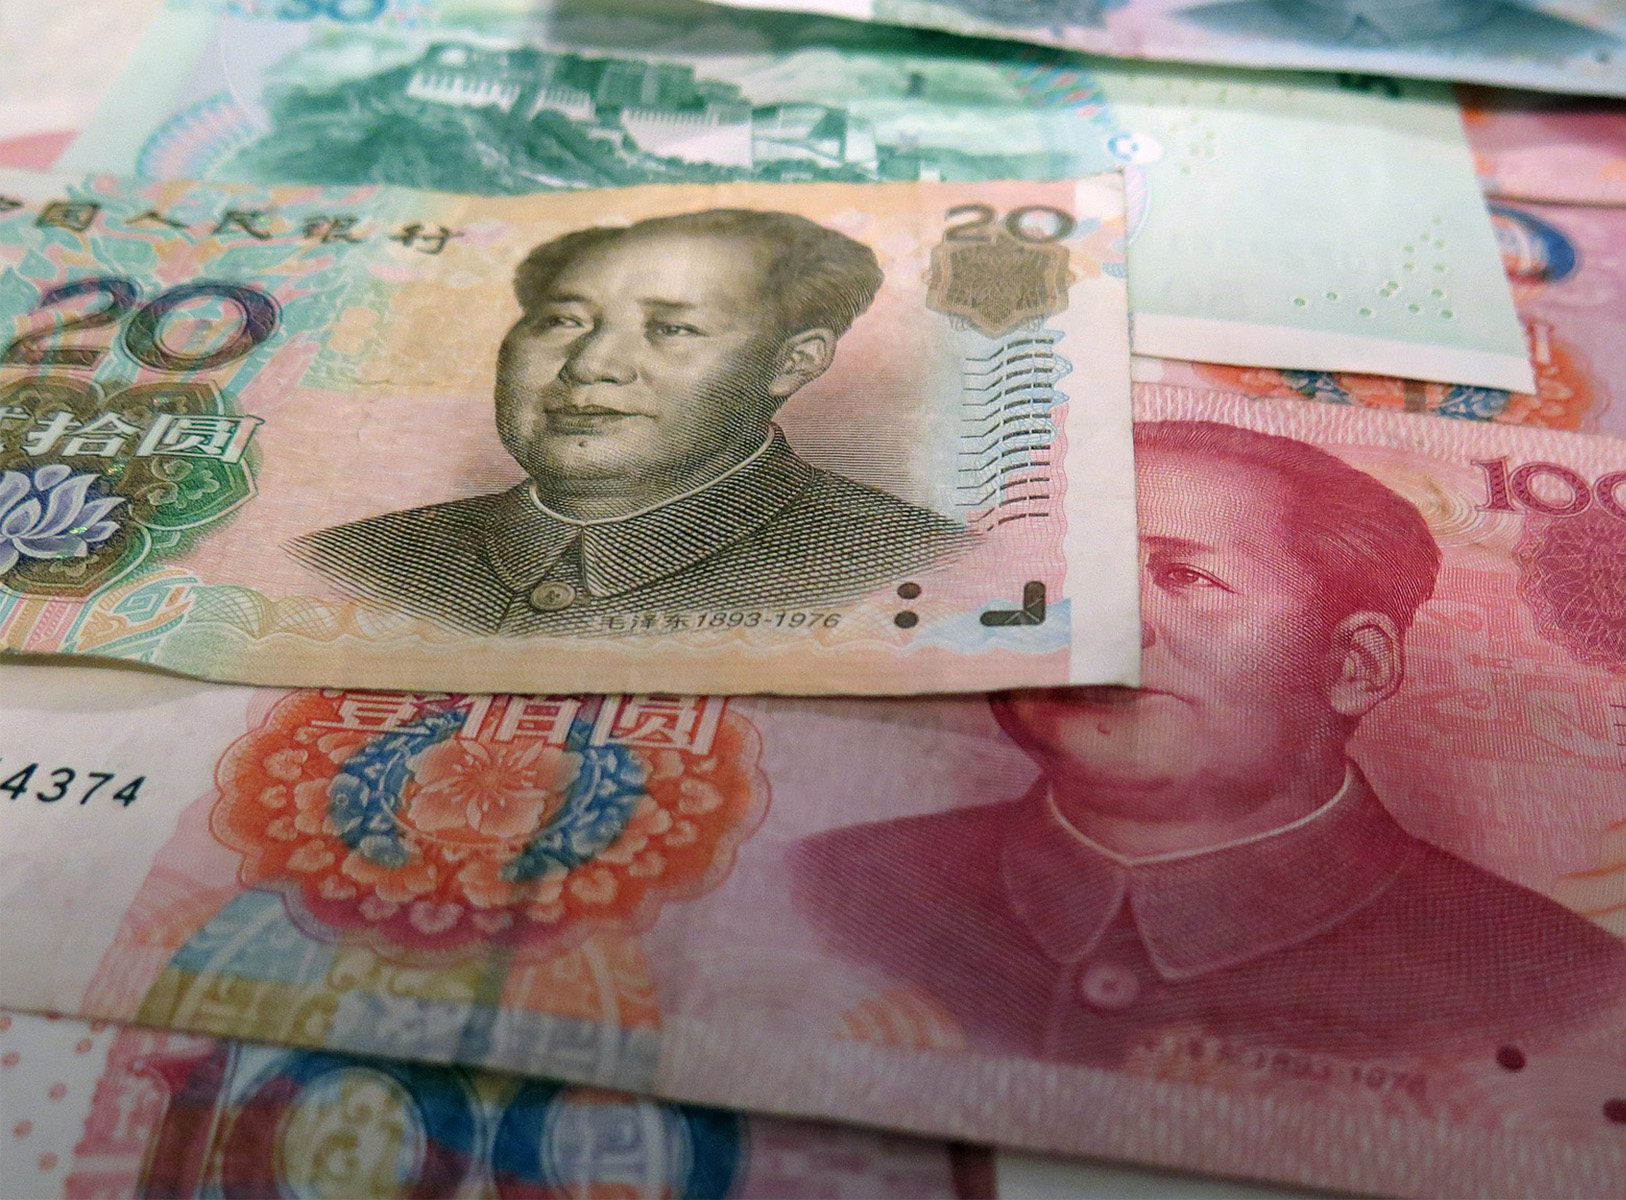 Trademark Fees Reduction in China, Up to 50%